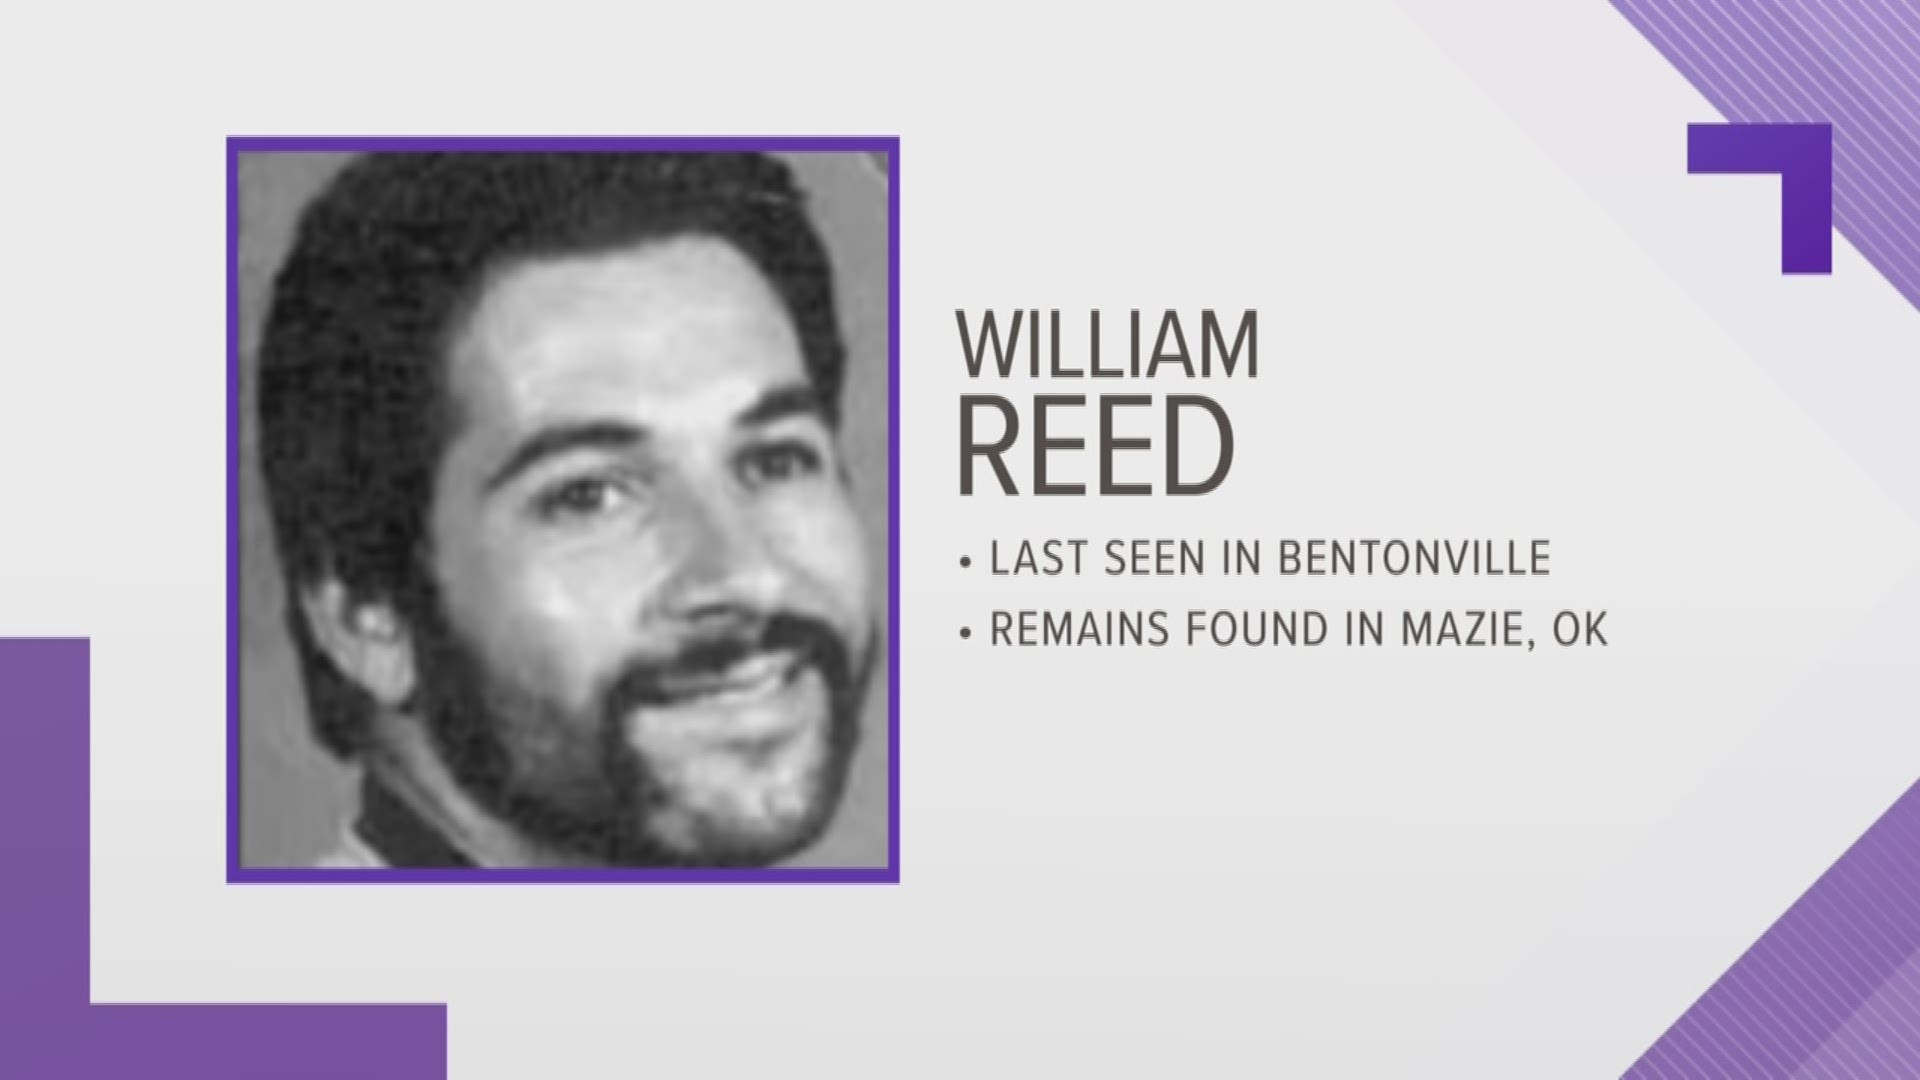 An Arkansas man whose remains were found in Oklahoma has been identified more than 30 years after his death thanks to DNA technology.